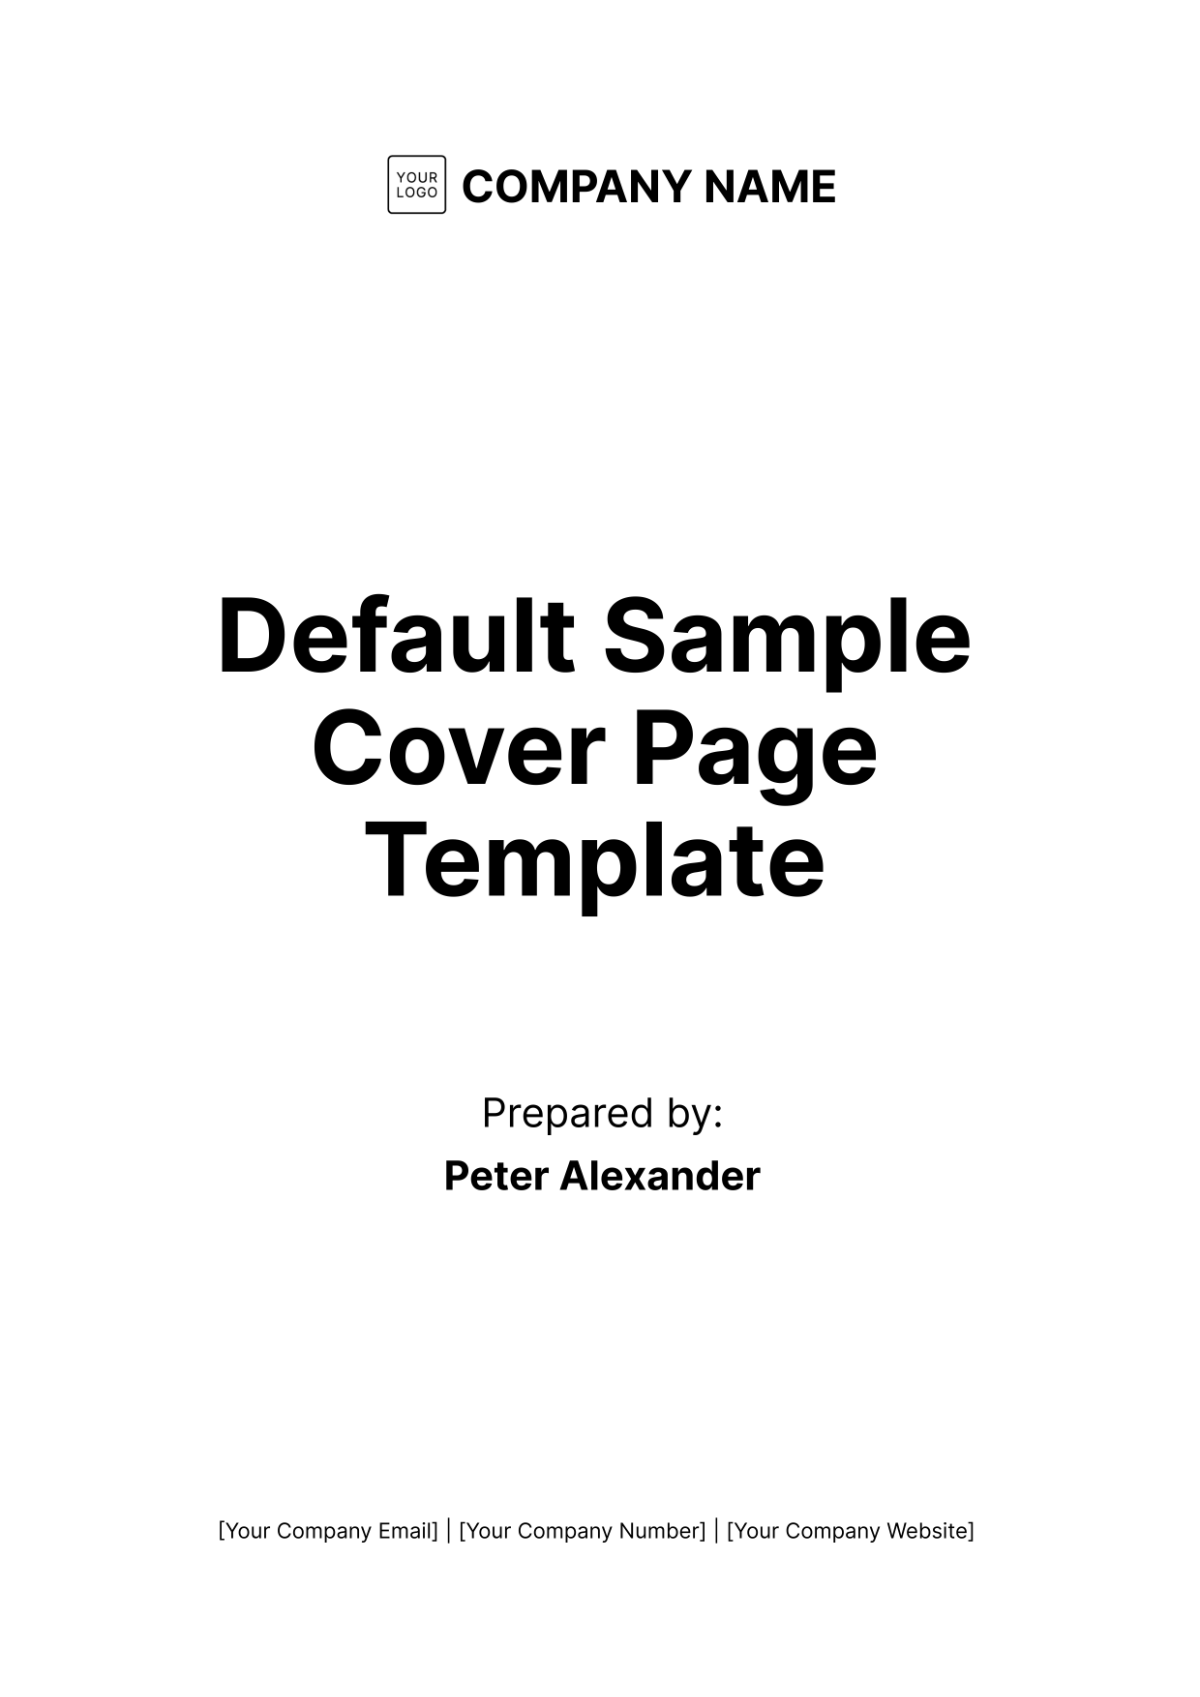 Default Cover Page